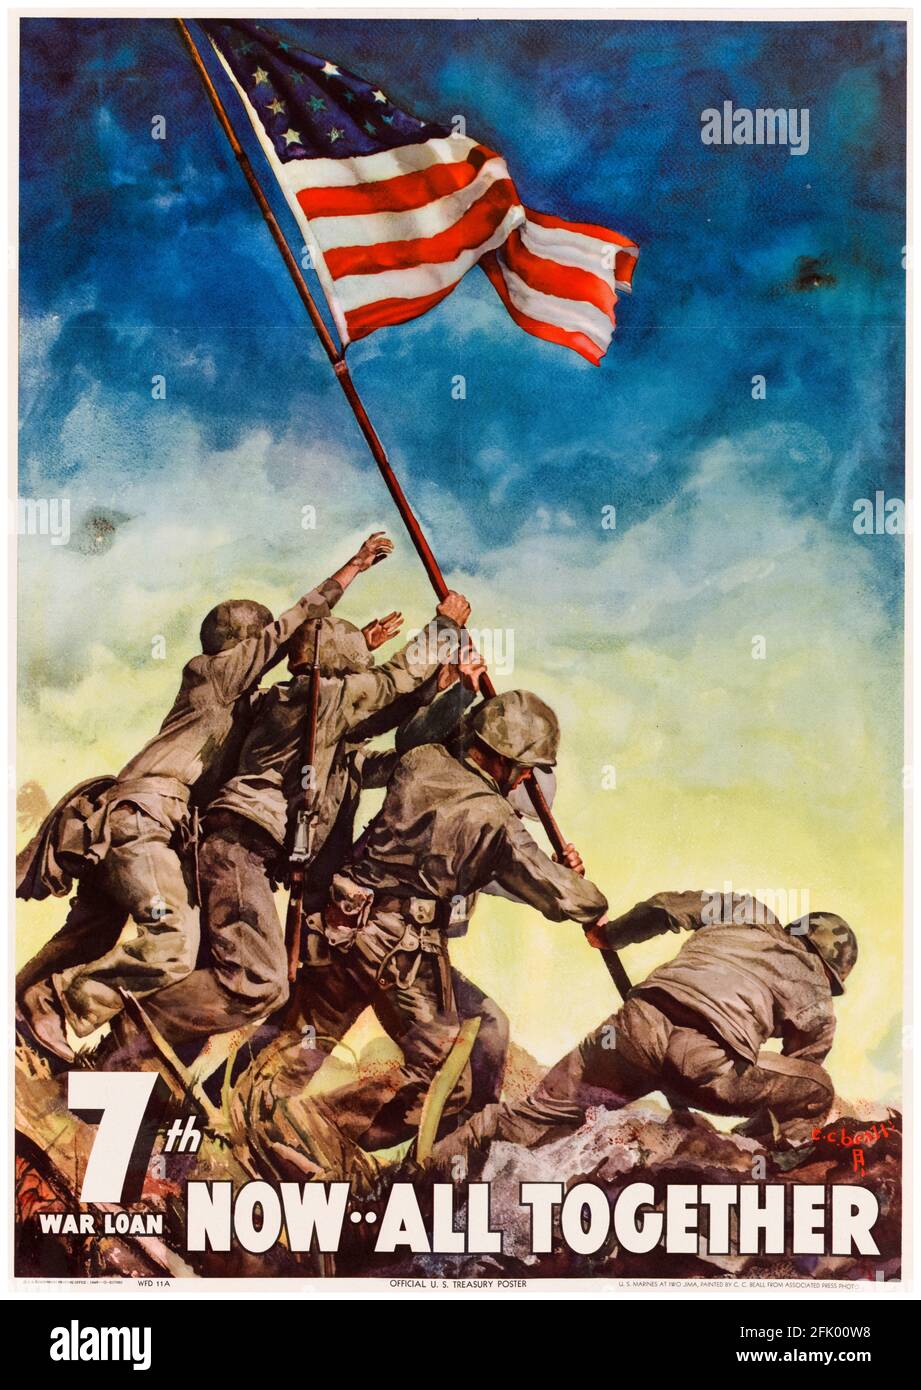 Now, All Together: US Marines raise the Stars and Stripes Flag on Iwo Jima, 7th War Loan, American, WW2 finance poster, 1942-1945 Stock Photo